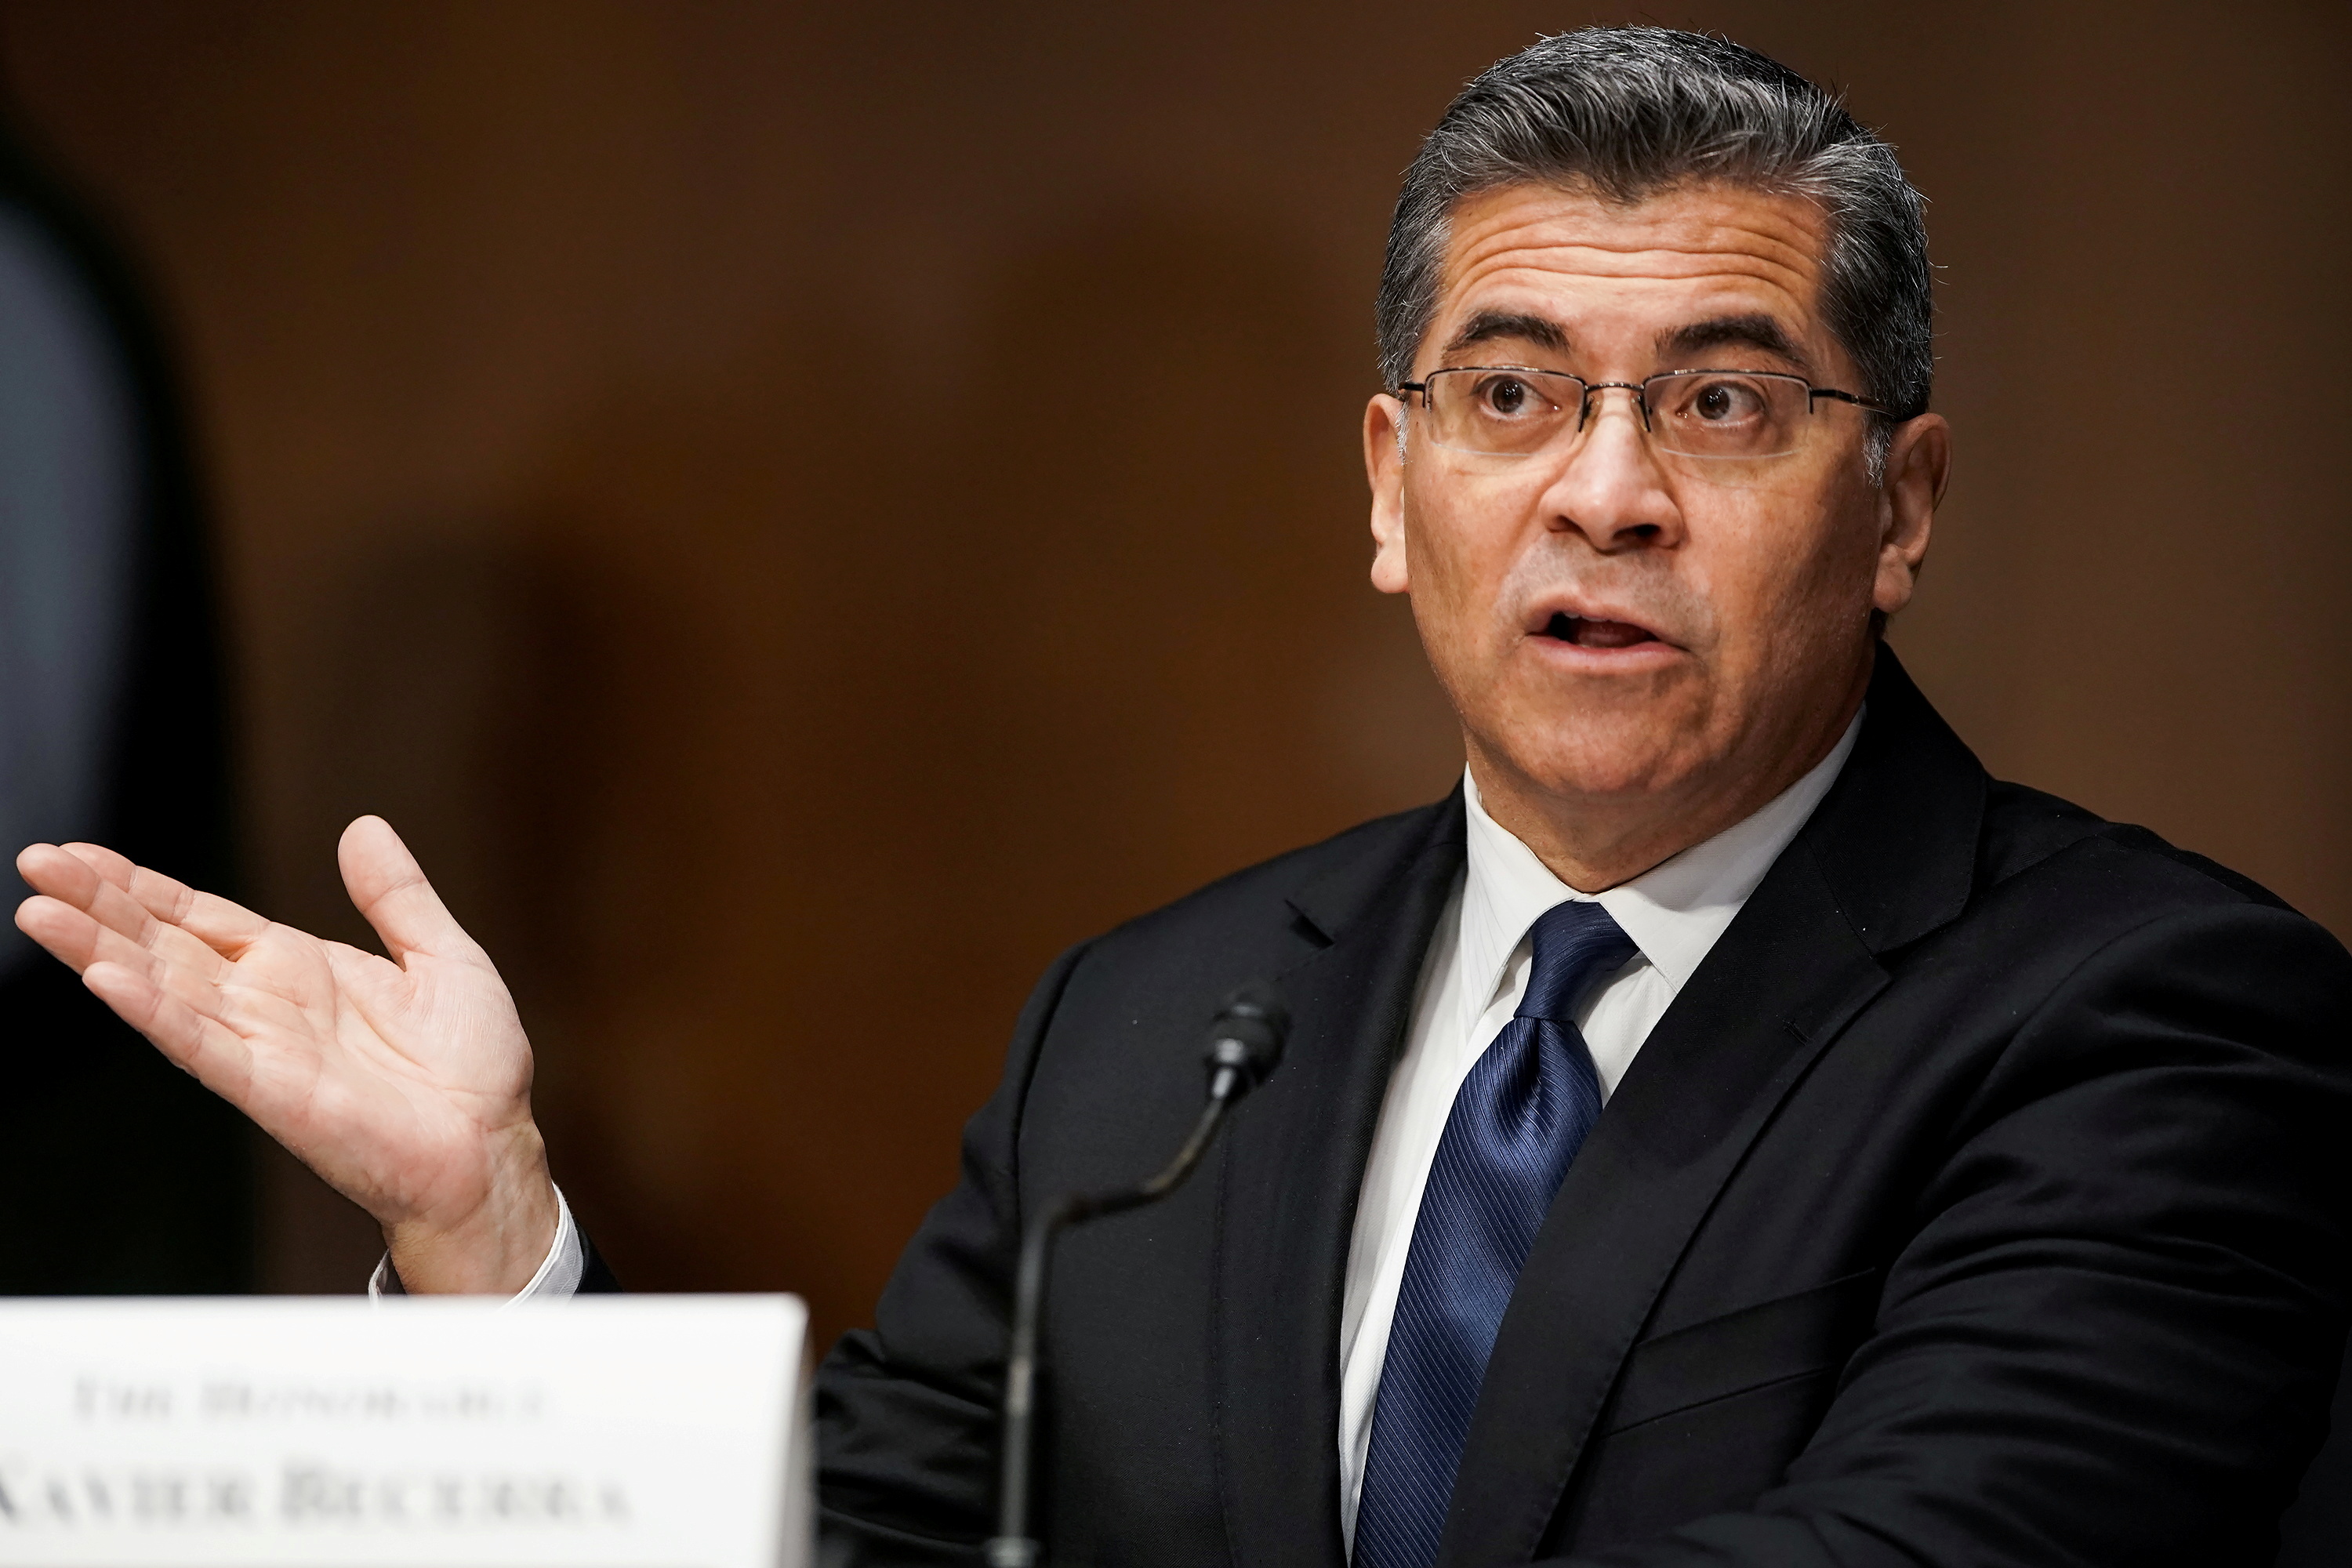 Senate Finance Committee hearing on the nomination of Xavier Becerra to be secretary of Health and Human Services